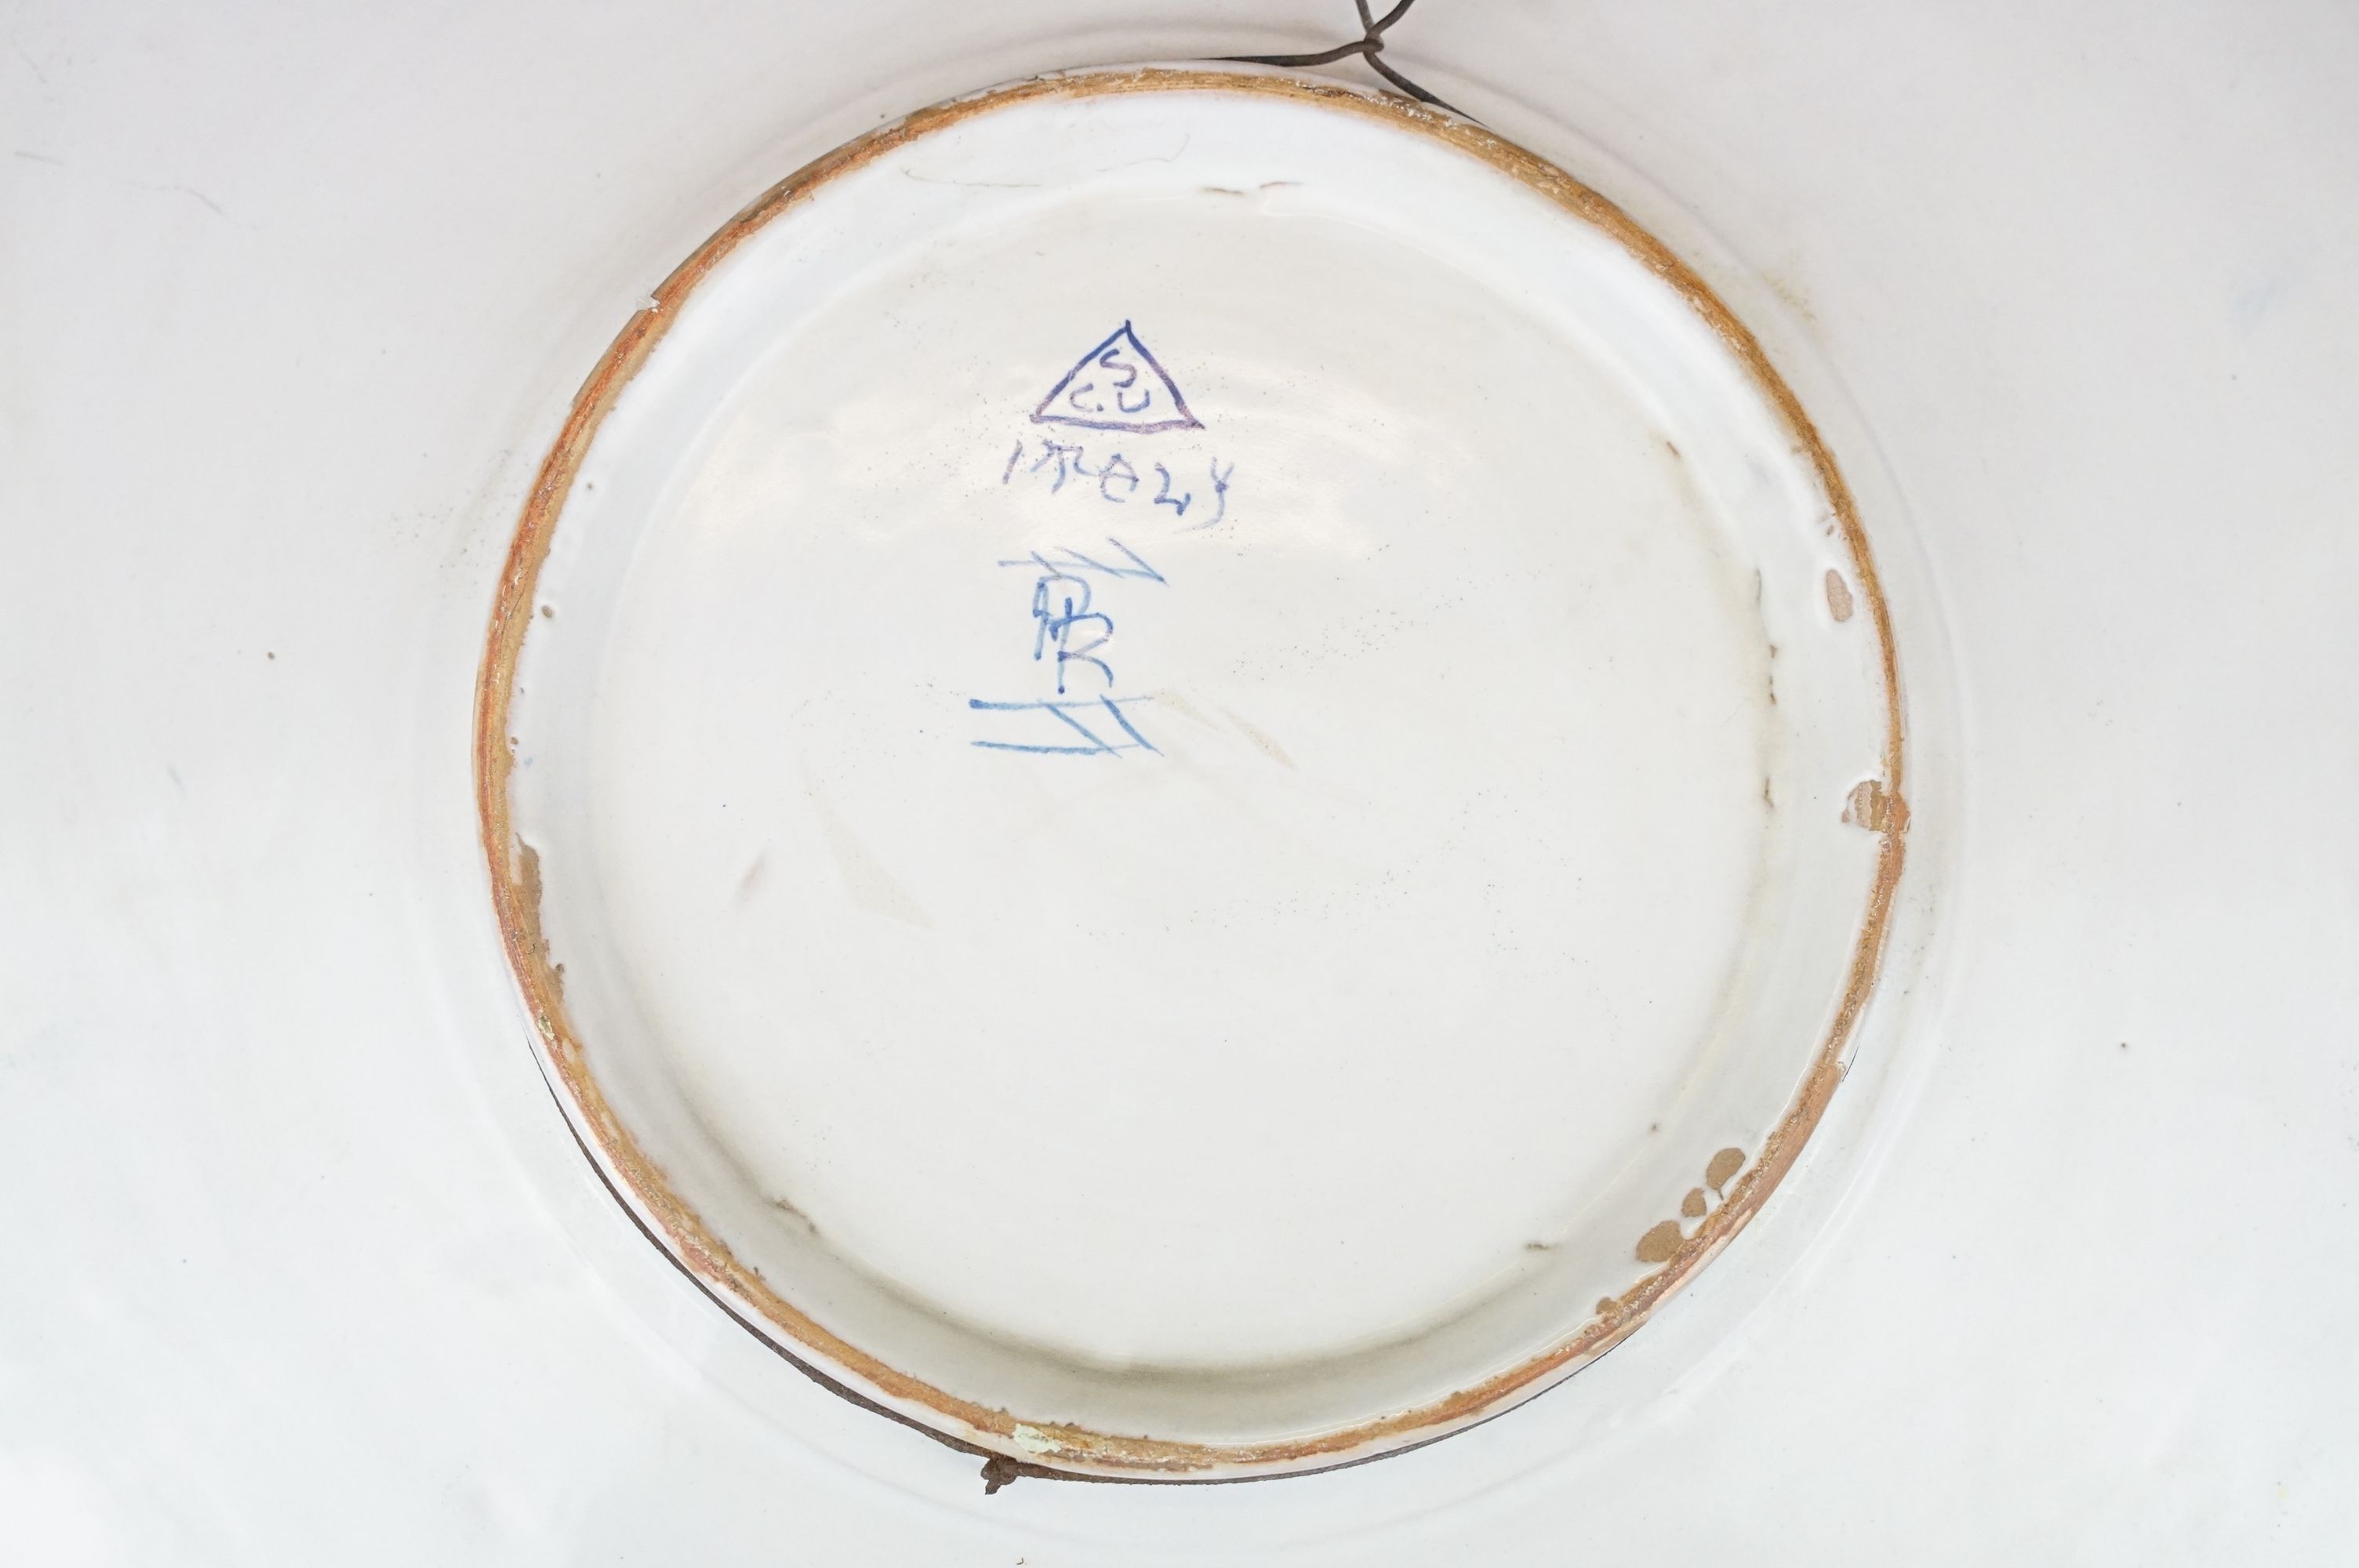 Two Italian faience wall plates, one depicting Roman figures with a volcano beyond, the other with a - Image 7 of 13